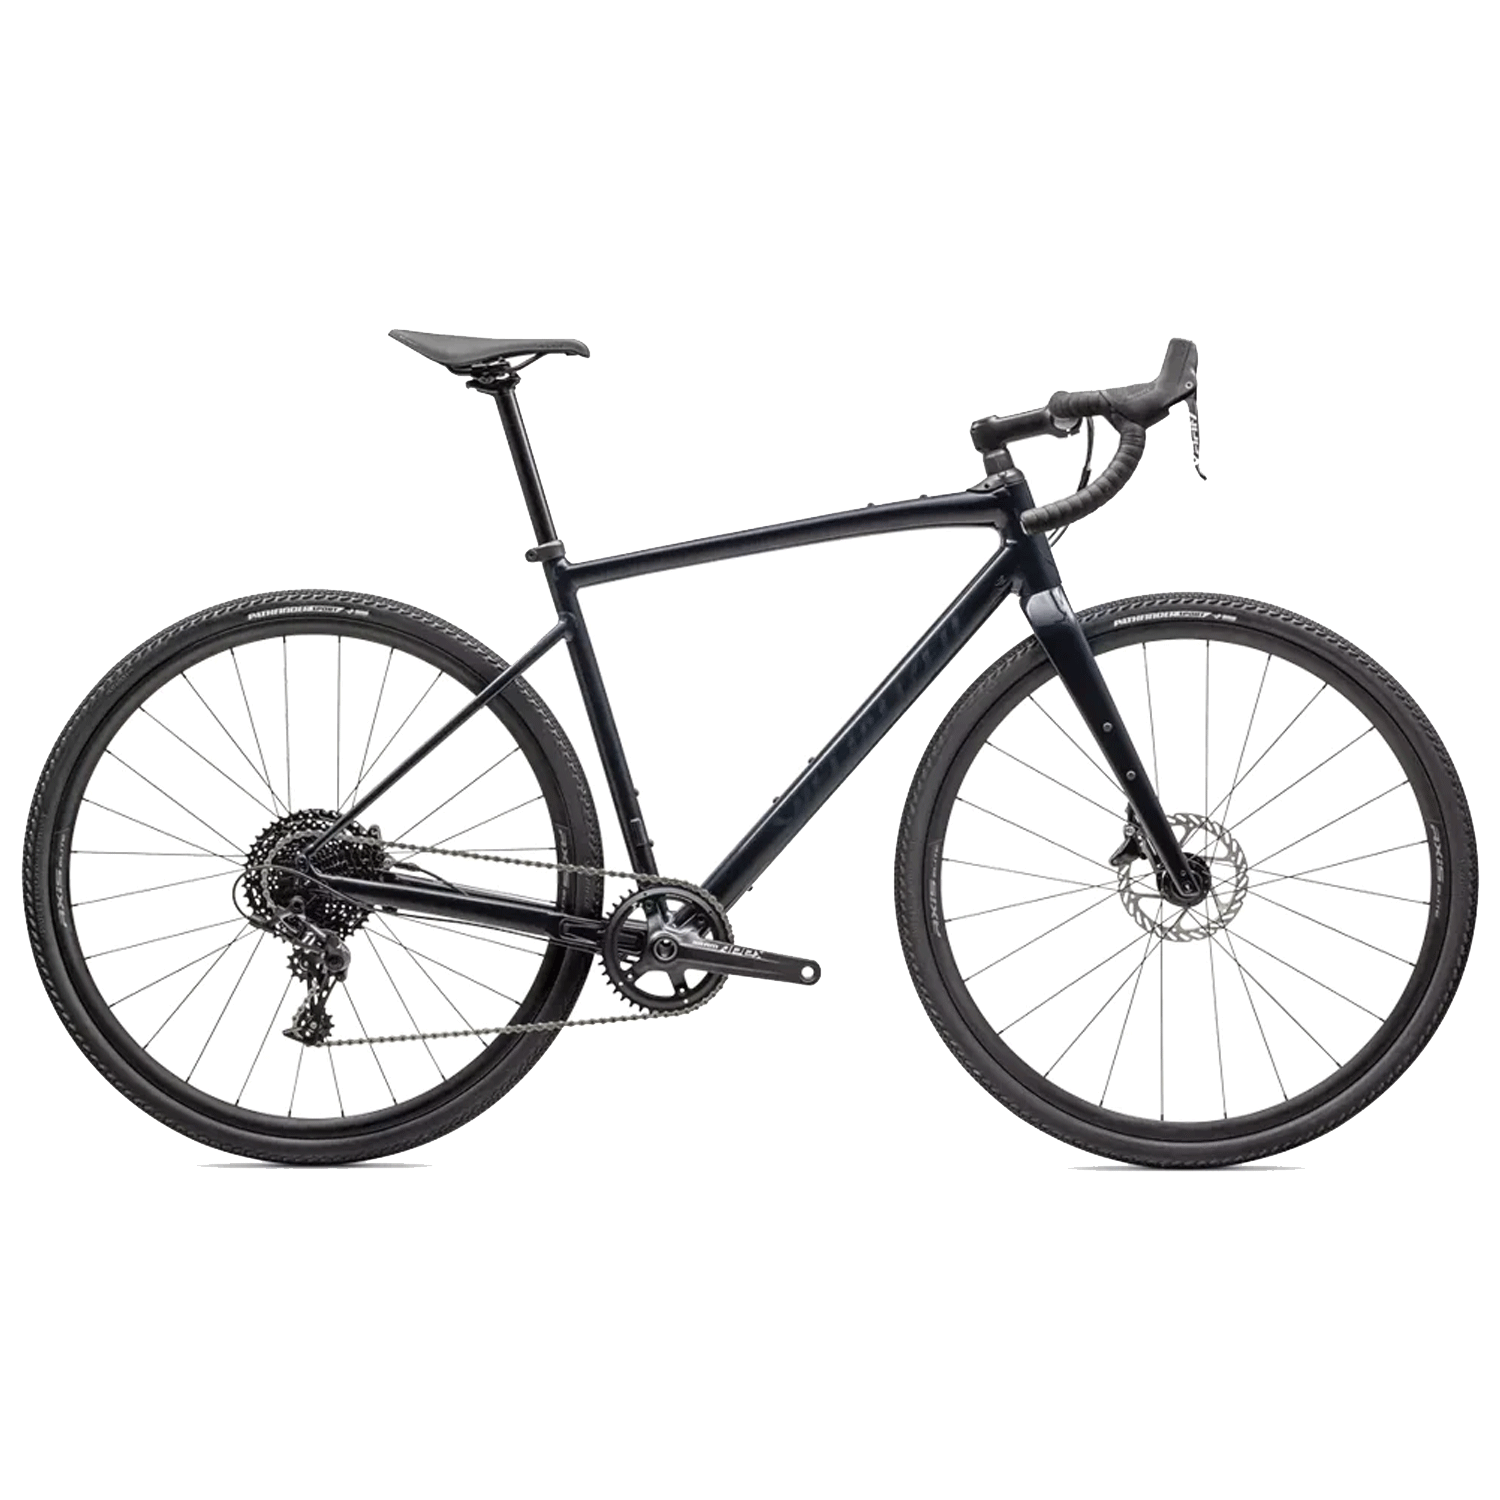 Specialized Diverge E5 Base Cycle City Bike Shop Repairs, 58% OFF